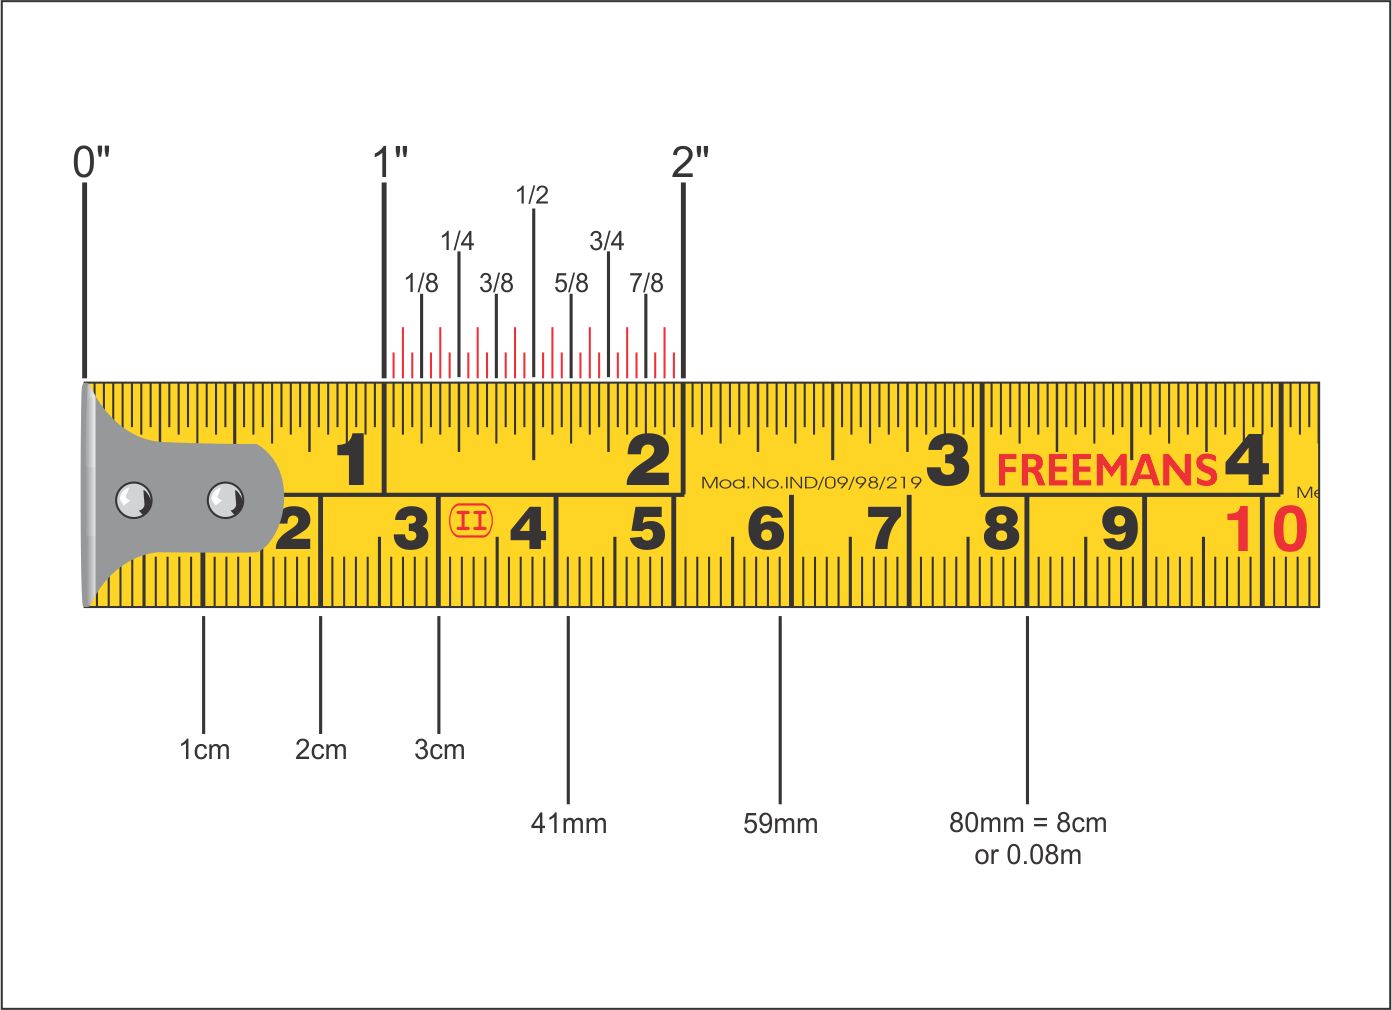 How to Read a Tape Measure, Reading Measuring Tape With Pictures, Construction Measuring Tools, Using Tape Measures